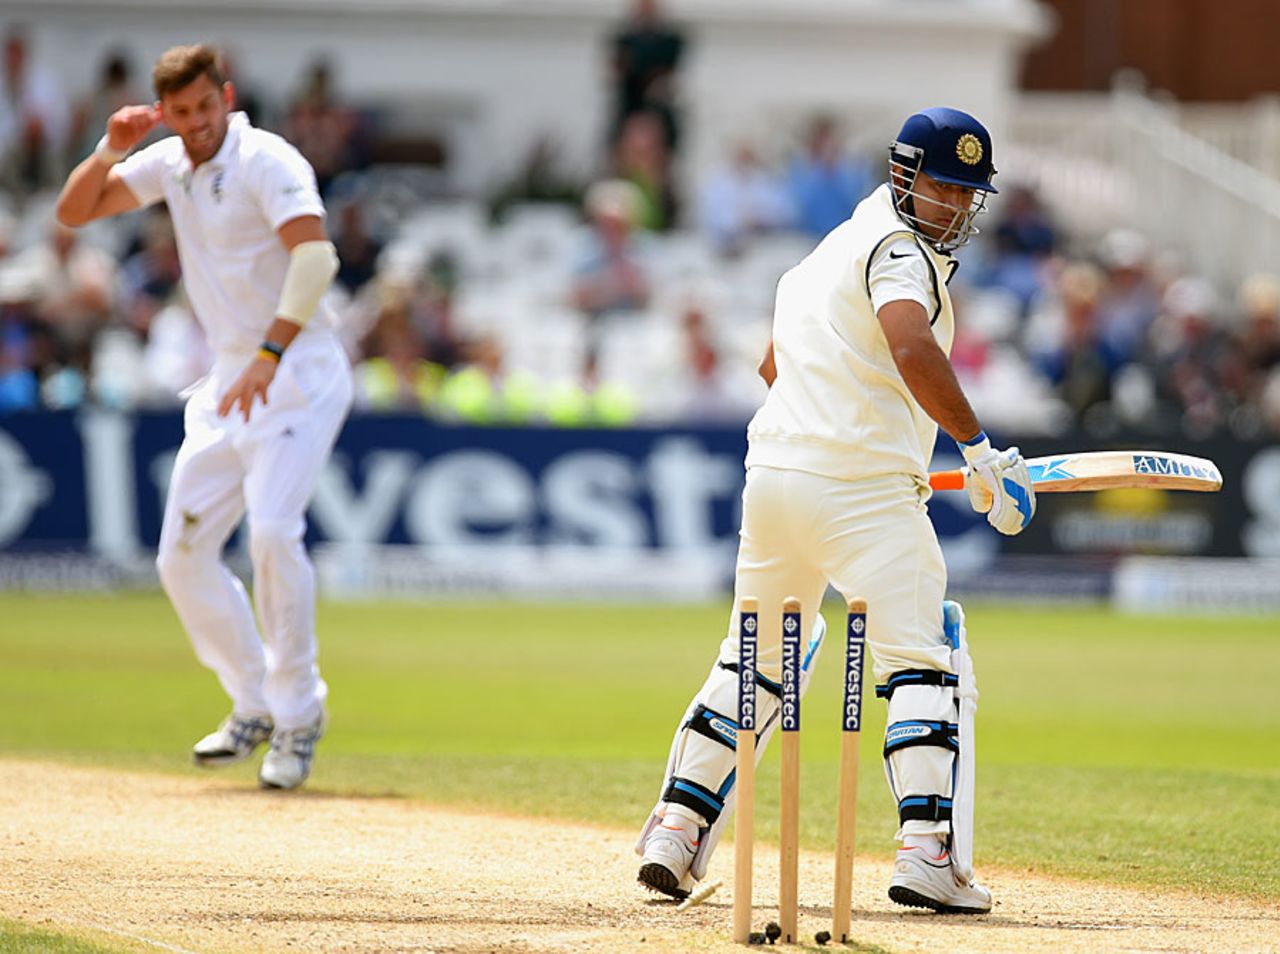 MS Dhoni looks back at his stumps after he was bowled by Liam Plunkett, England v India, 1st Investec Test, Trent Bridge, 5th day, July 13, 2014